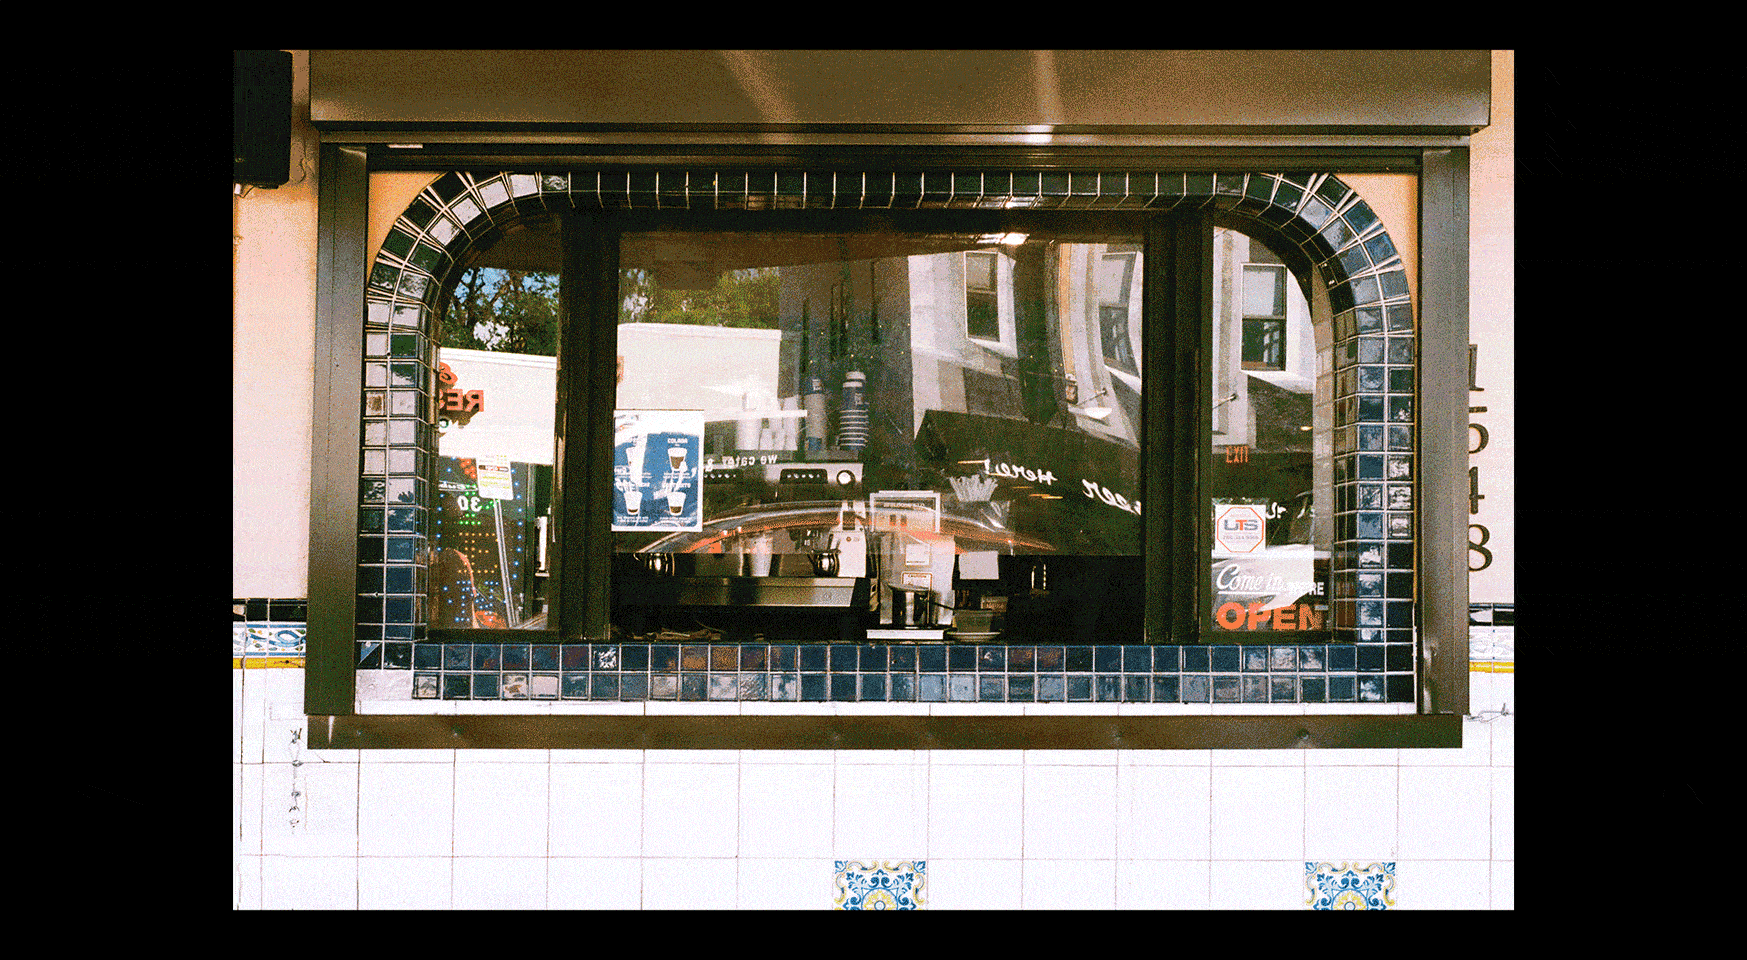 Photograph of what appears to be a rectangular window, on a partially tiled wall, which looks into to a café and is reflecting other nearby buildings.